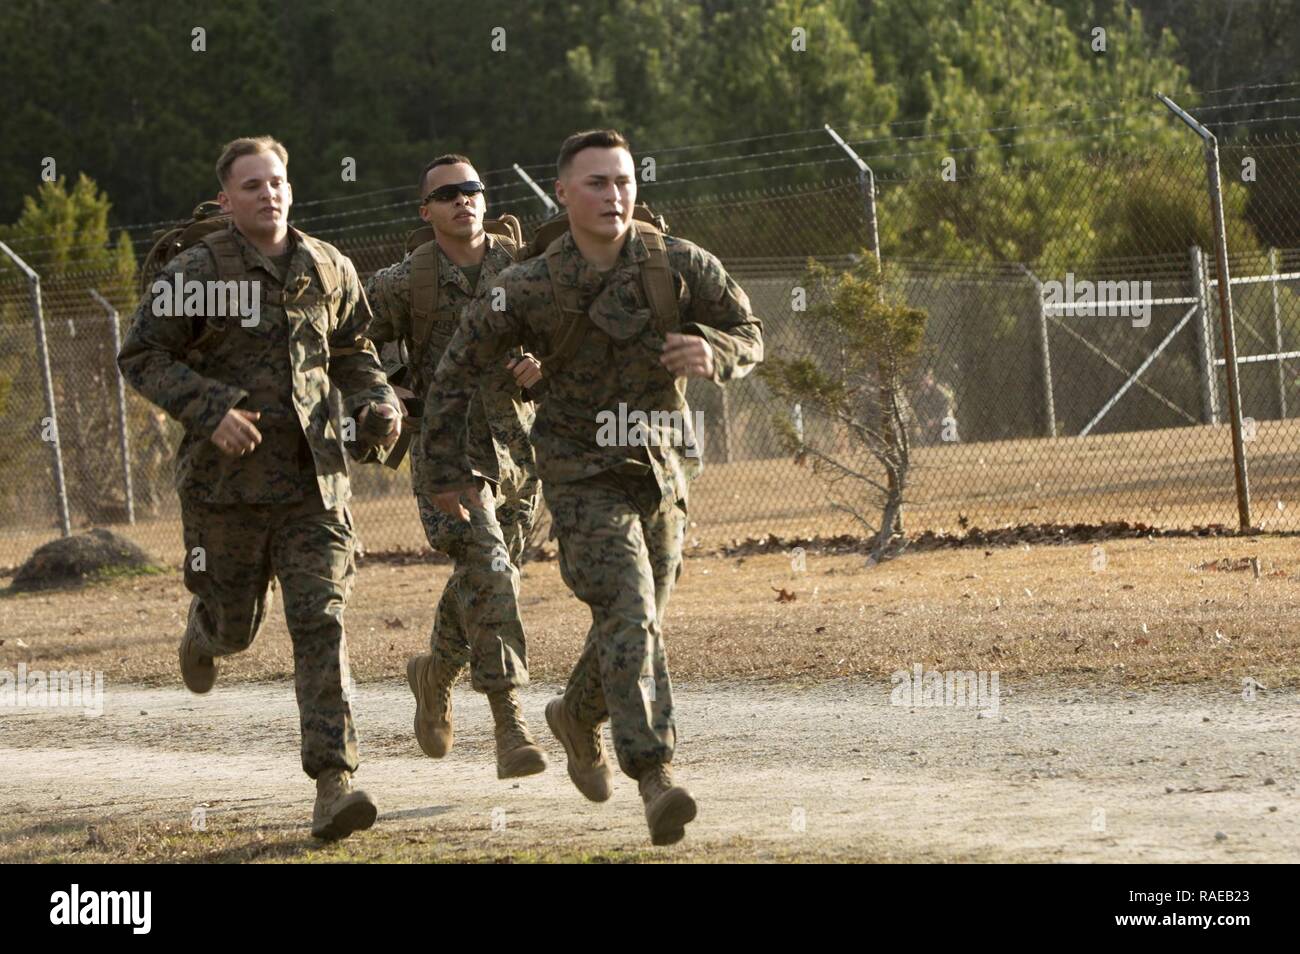 U.S. Marines with 2nd Marine Division (2d MARDIV), run during the 2d MARDIV 50-mile challenge hike on Camp Lejeune, N.C., Feb. 1, 2017. The hike was held to challenge Marines of 2d MARDIV as well as test their skill and will. Stock Photo